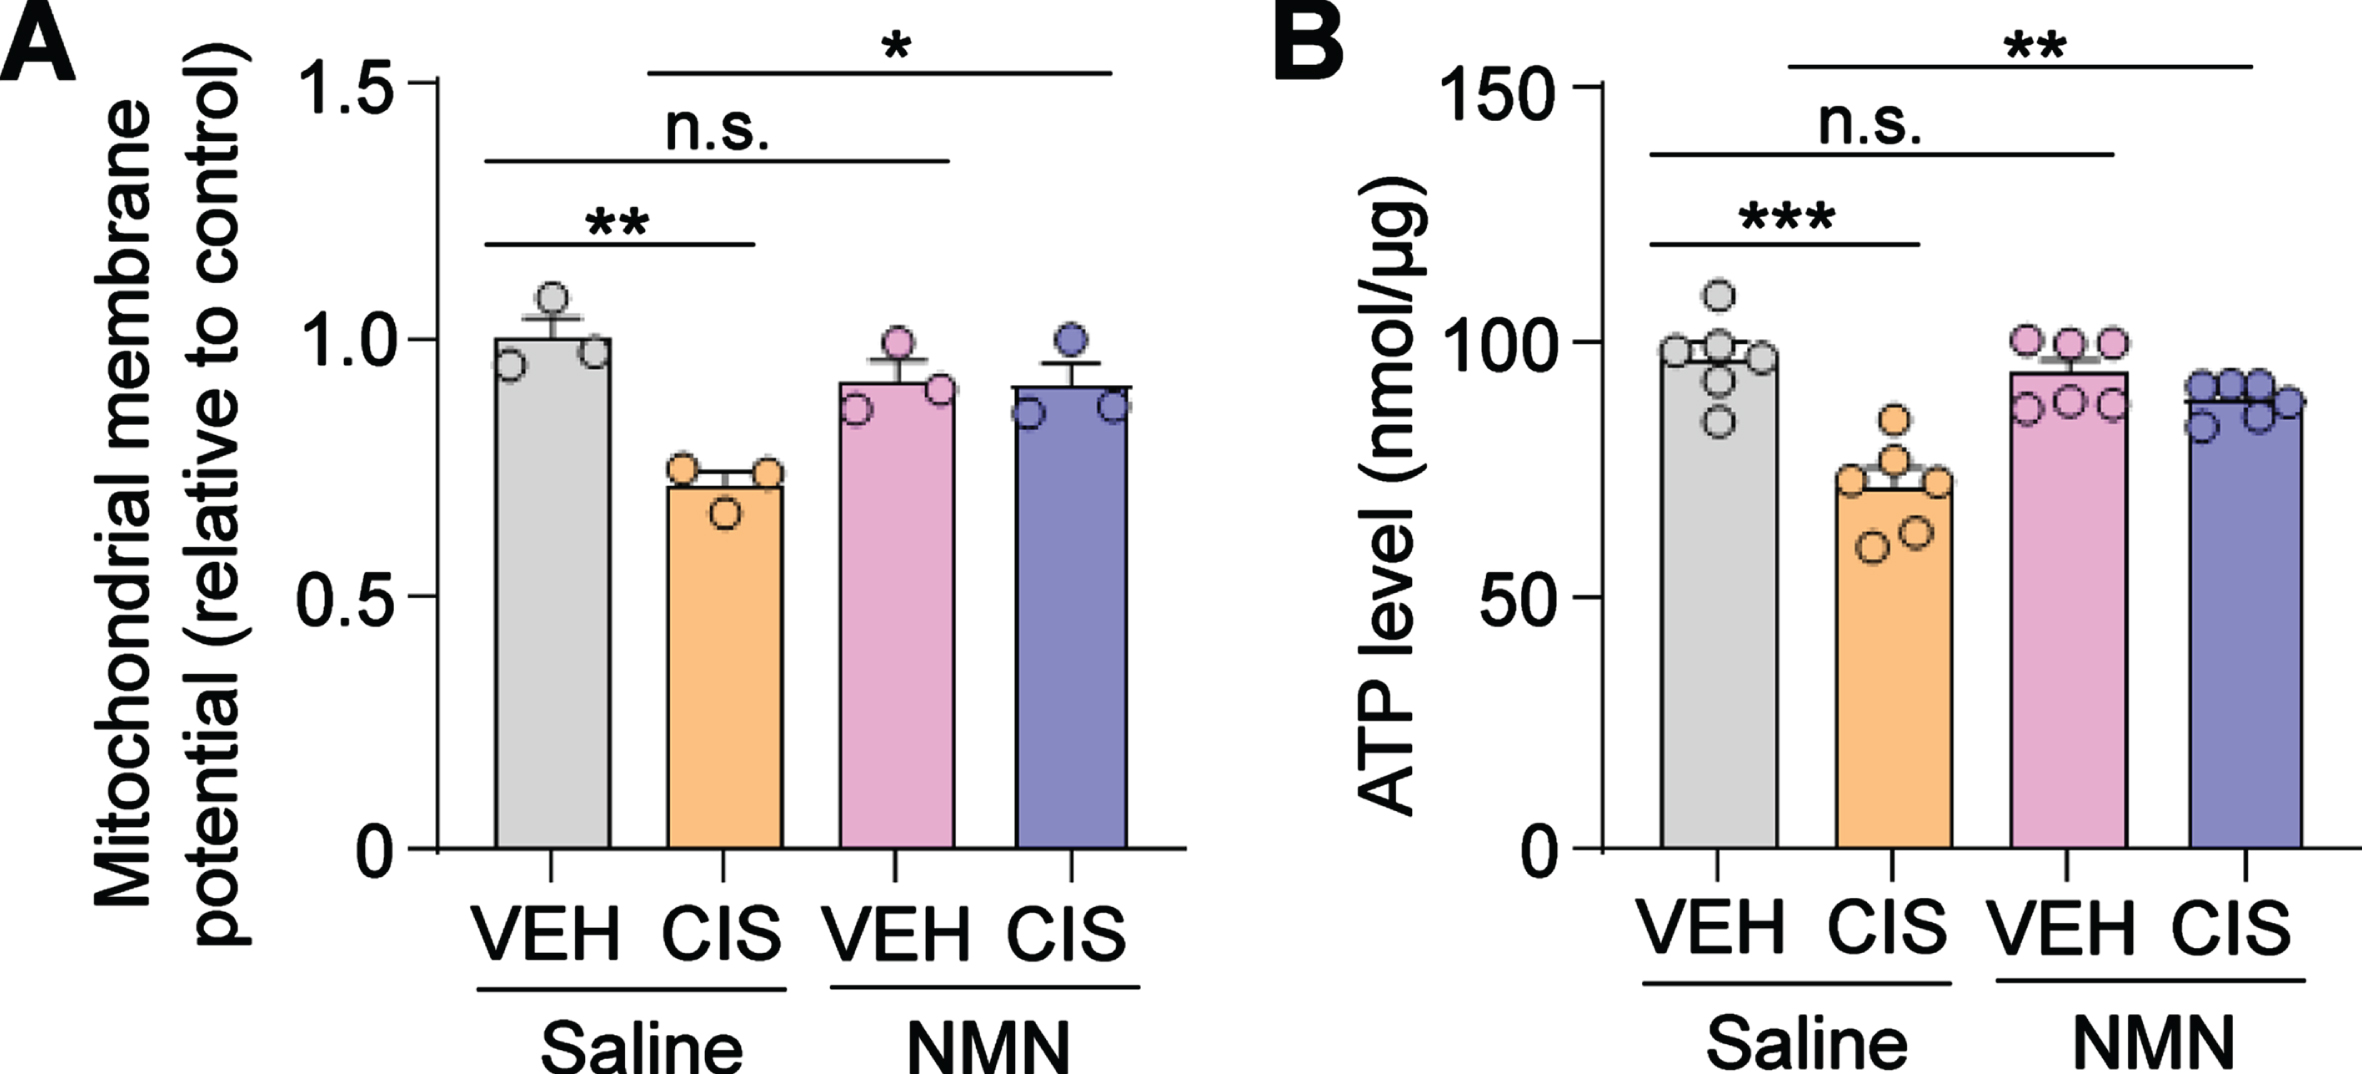 NMN prevents cisplatin-induced reductions in mitochondrial membrane potential and ATP production in human cortical neurons. (A) The mitochondrial membrane potential (relative to vehicle- and saline-treated group) was evaluated as described in the Methods section. (B) ATP levels were estimated by using the ATP bioluminescent assay kit. Circles in bar graphs represent analysis of an individual well. All experiments were performed in two or three independent experiments. Data represent mean±SEM. One-way ANOVA followed by Tukey’s post-hoc corrections. *: P < 0.5, **: P < 0.01, ***: P < 0.001, n.s.: not significant. VEH: Vehicle, CIS: Cisplatin, NMN: nicotinamide mononucleotide.